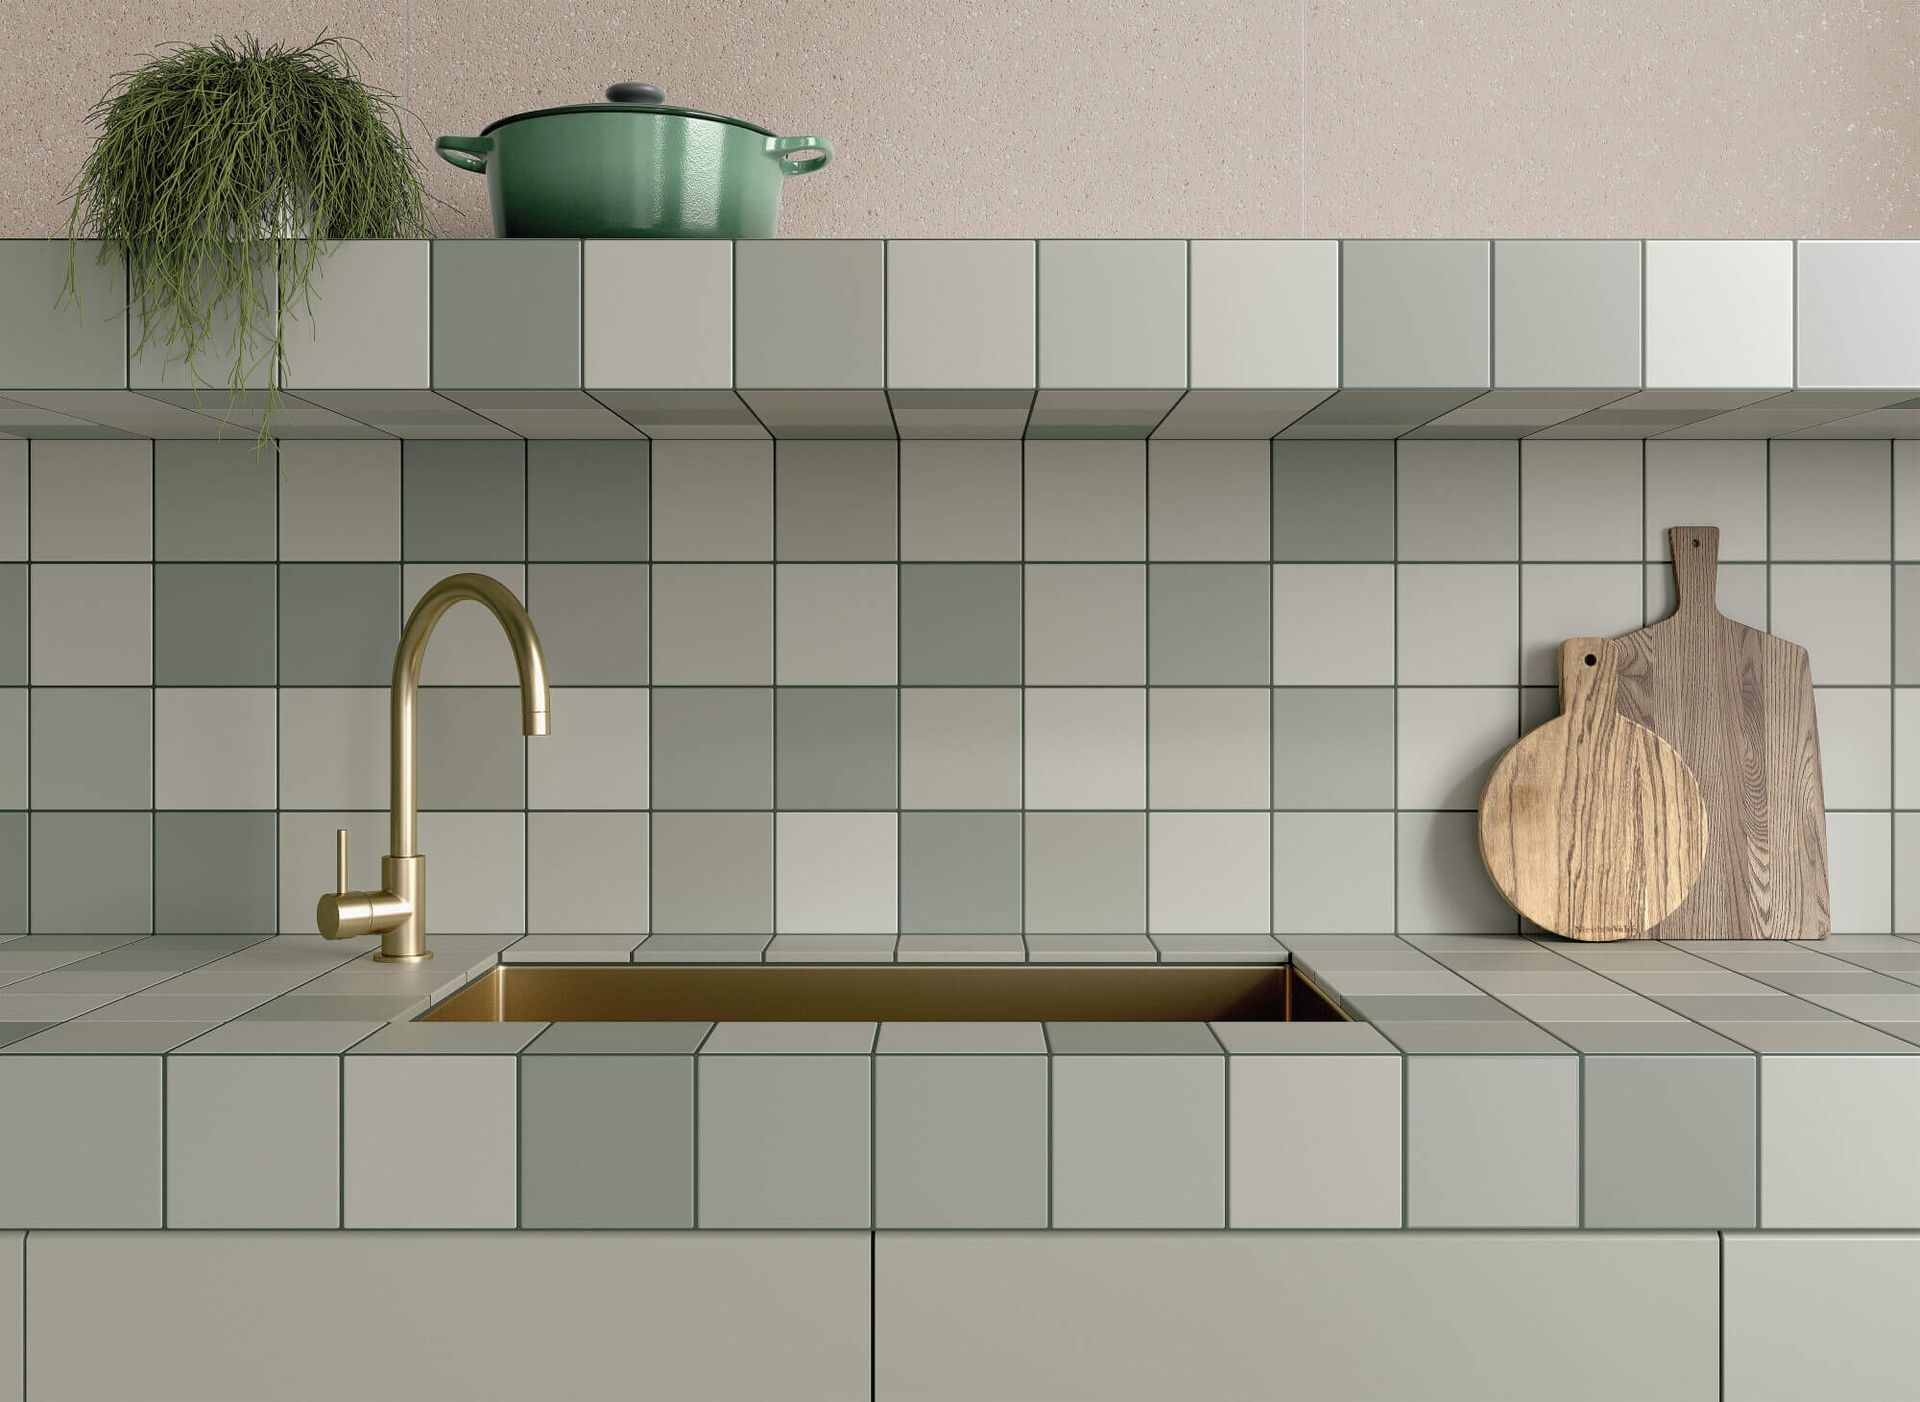 light kitchen aesthetic with golden brass tap and sink and wooden cutting boards